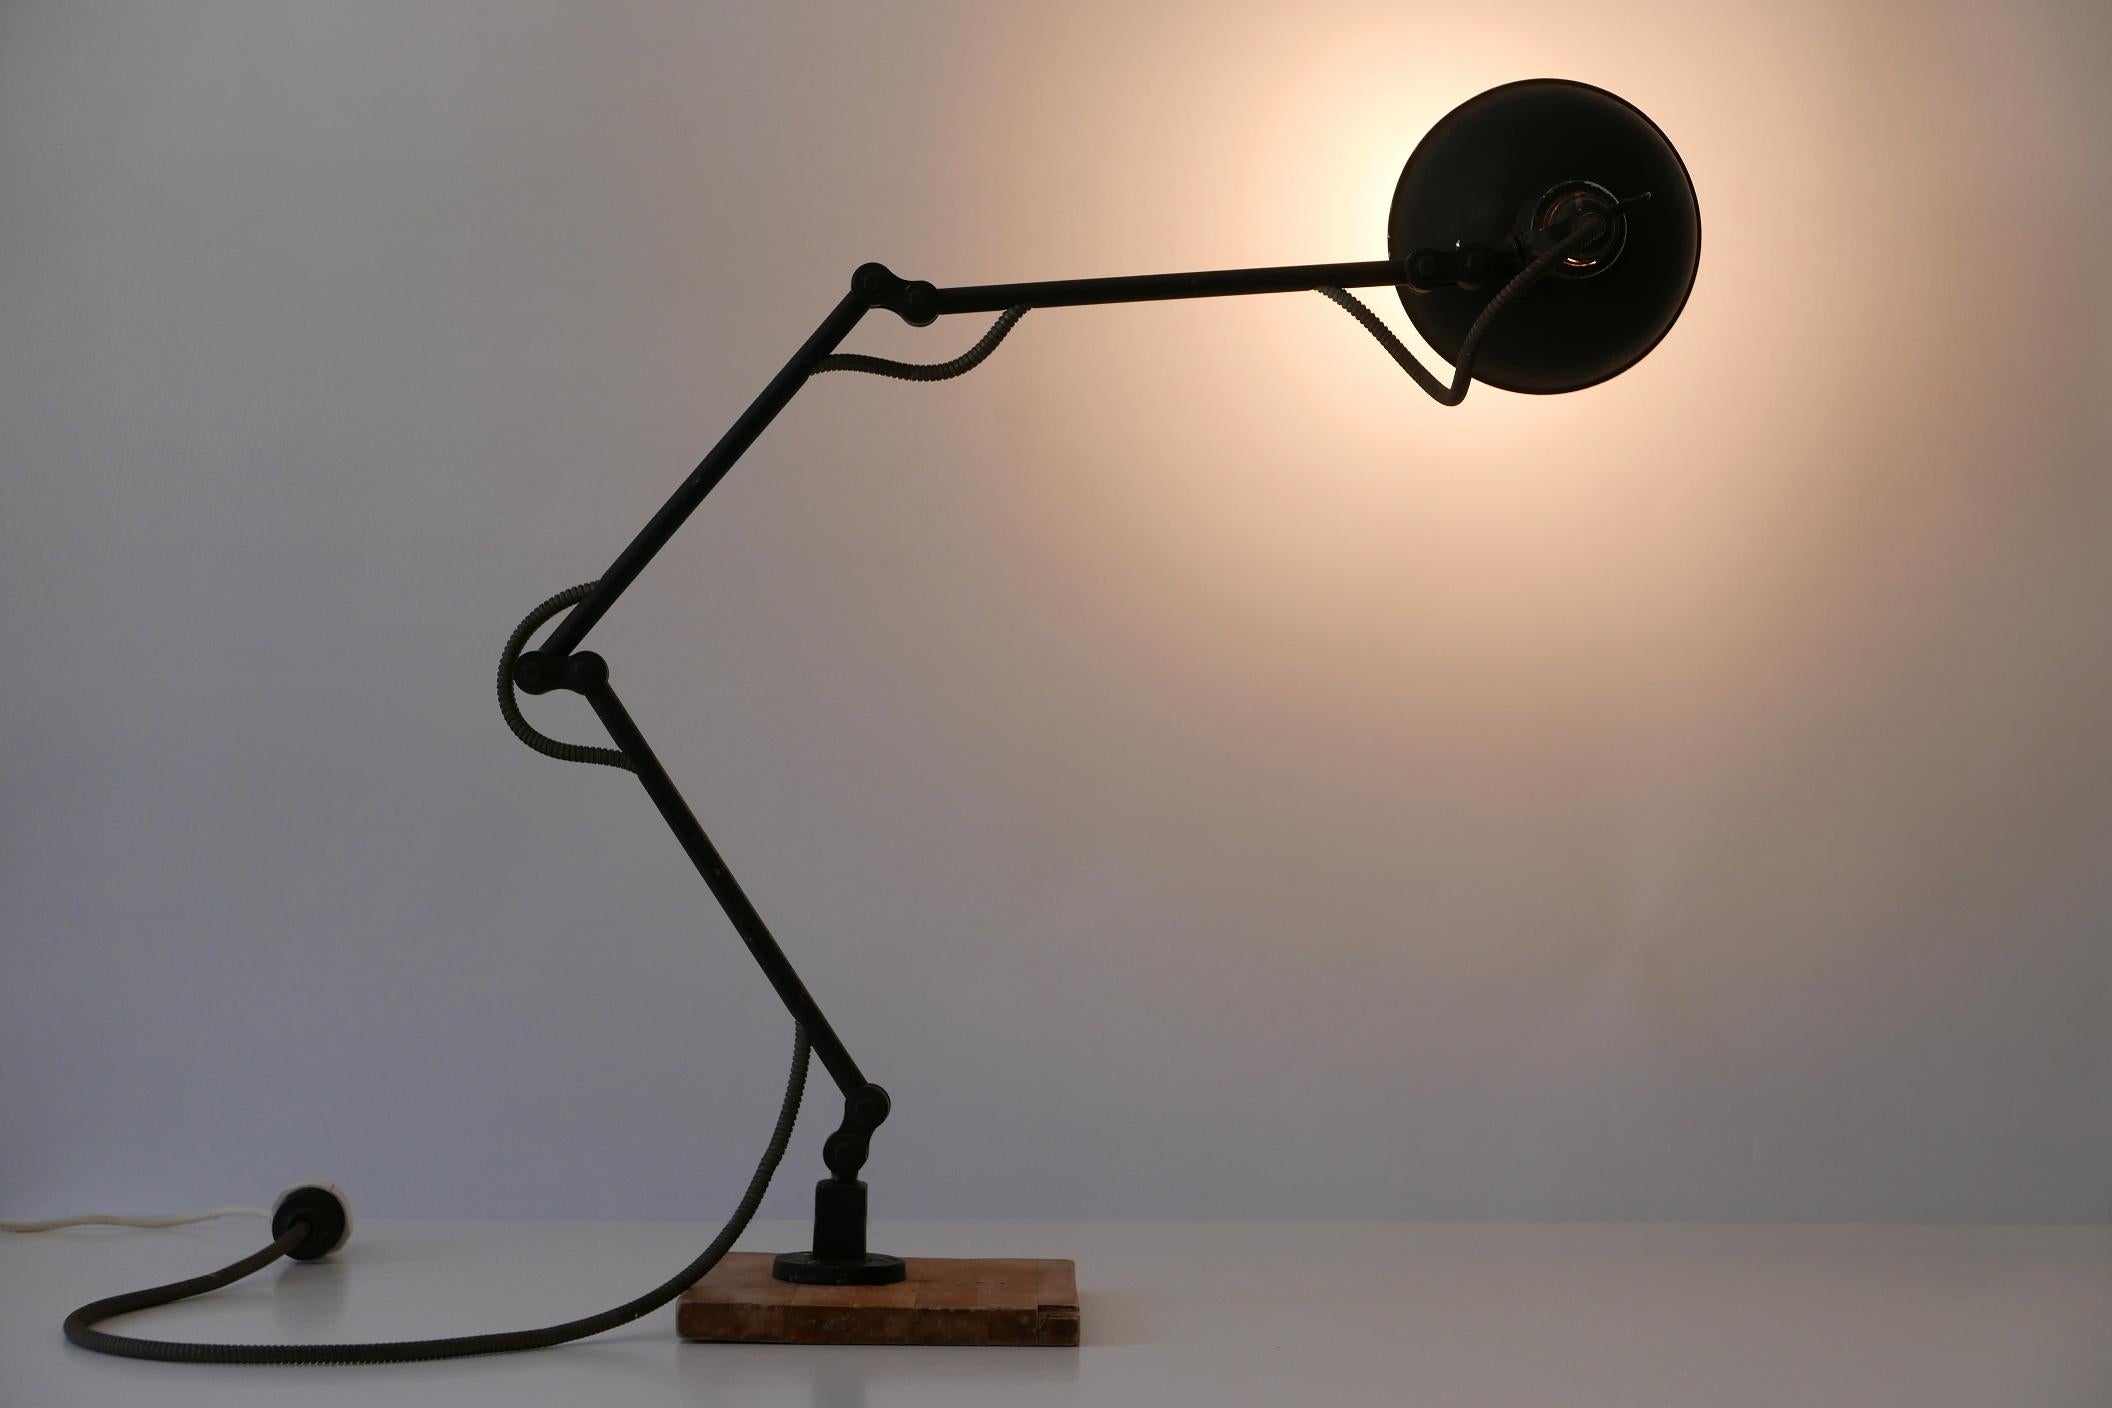 Exceptional Articulated Bauhaus Workshop Wall Lamp or Task Light 1920s Germany In Good Condition For Sale In Munich, DE